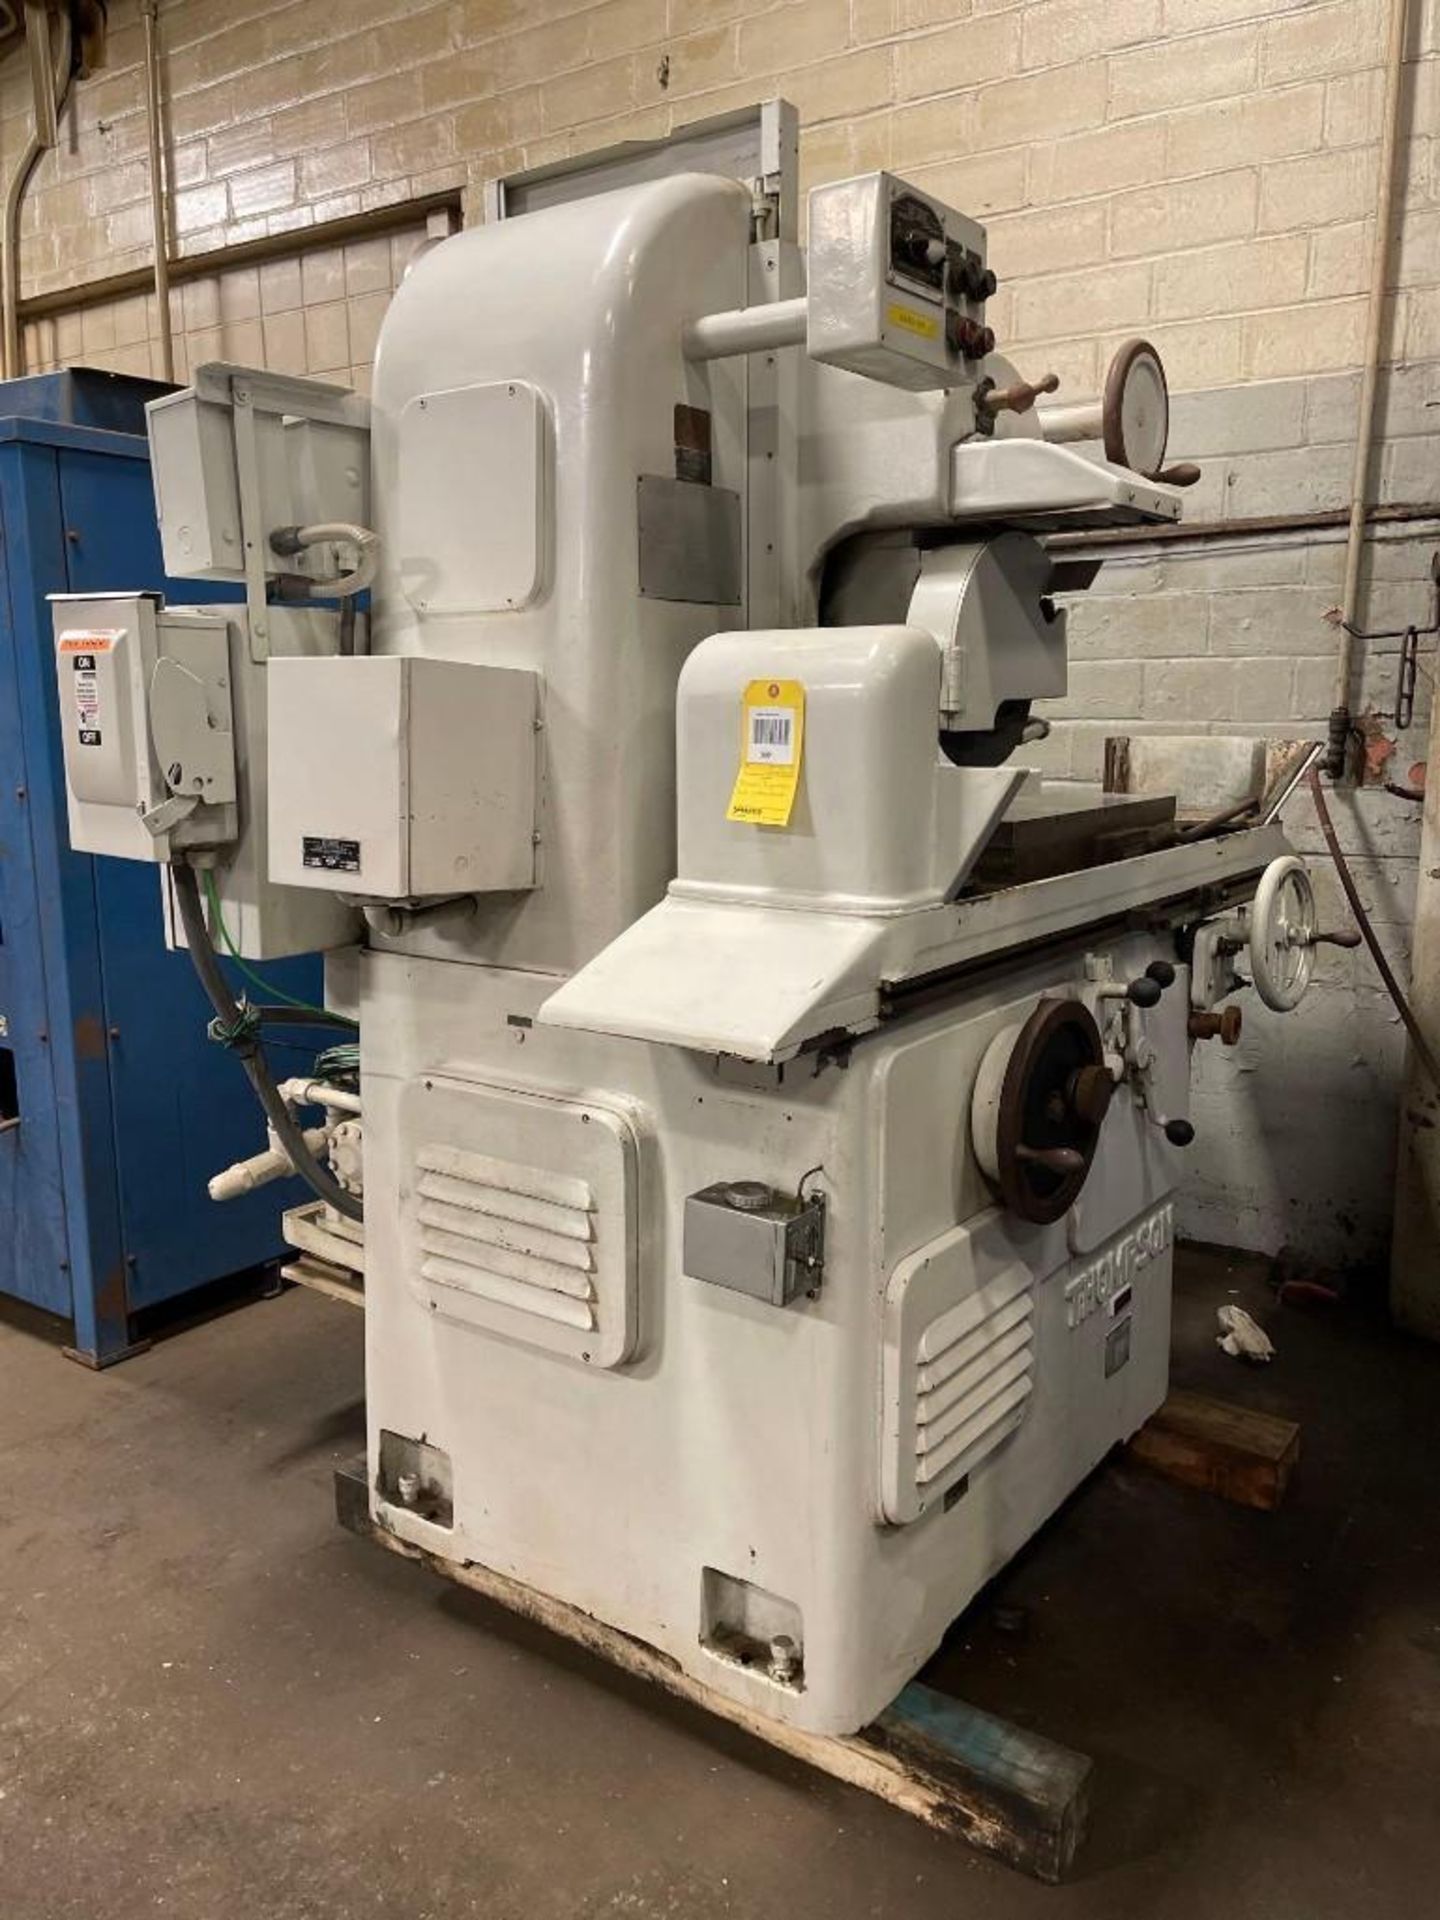 Thompson Reciprocating Table Surface Grinder; (OK location)